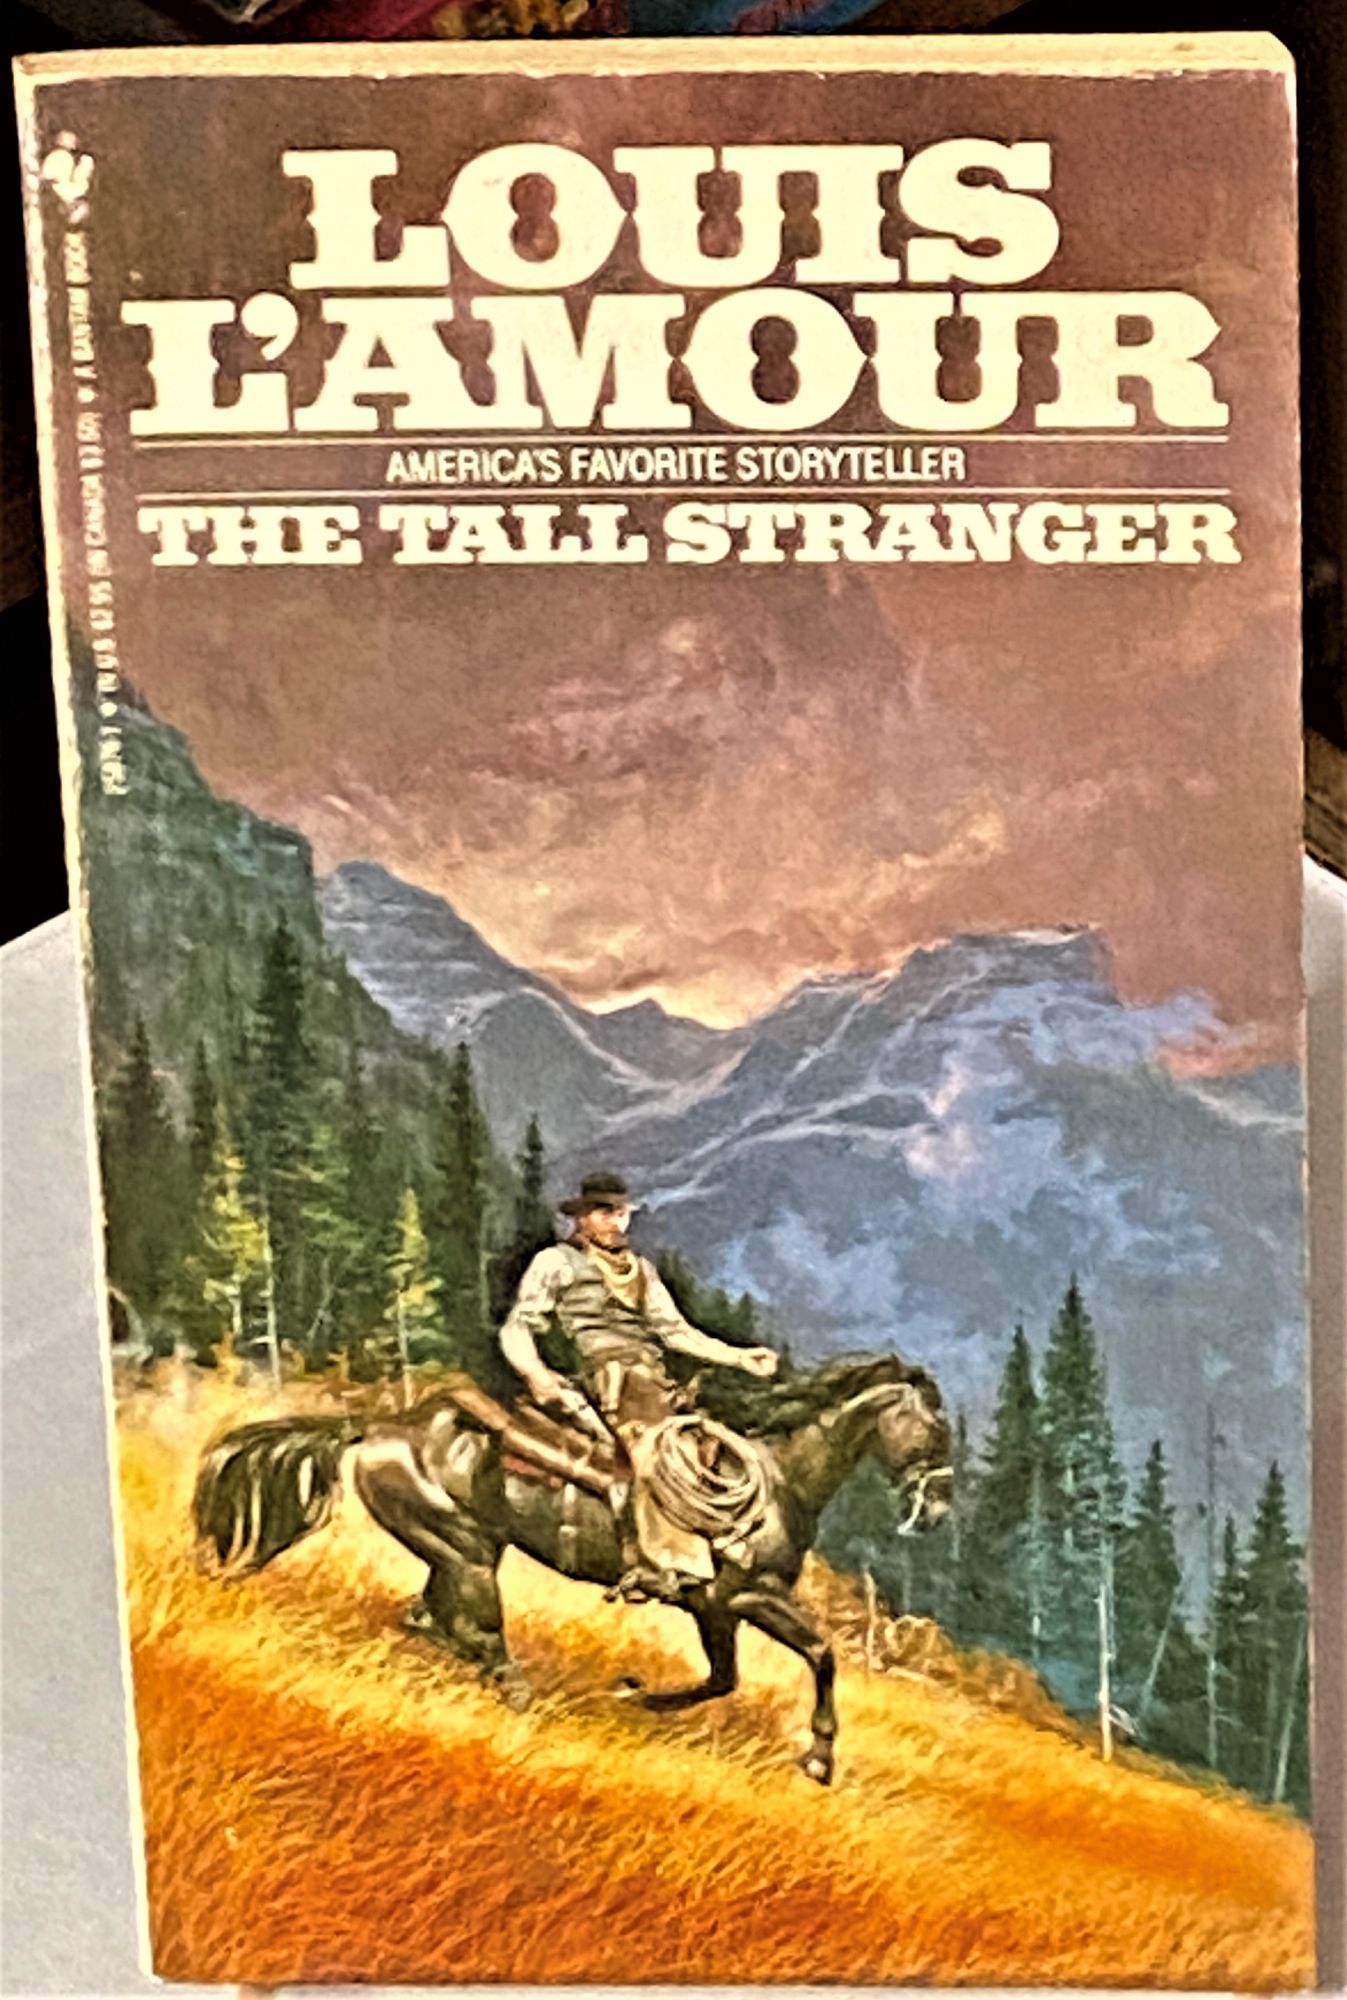 Louis L'Amour Westerns #18 - The Tall Stranger (1957)